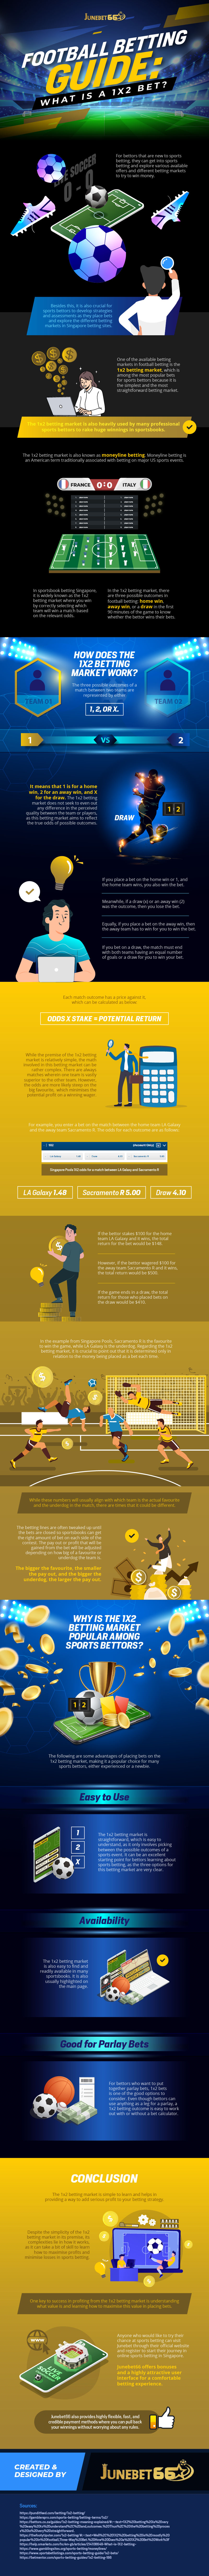 Football_Betting_Guide_What_is_a_1X2 Bet_infographic_image